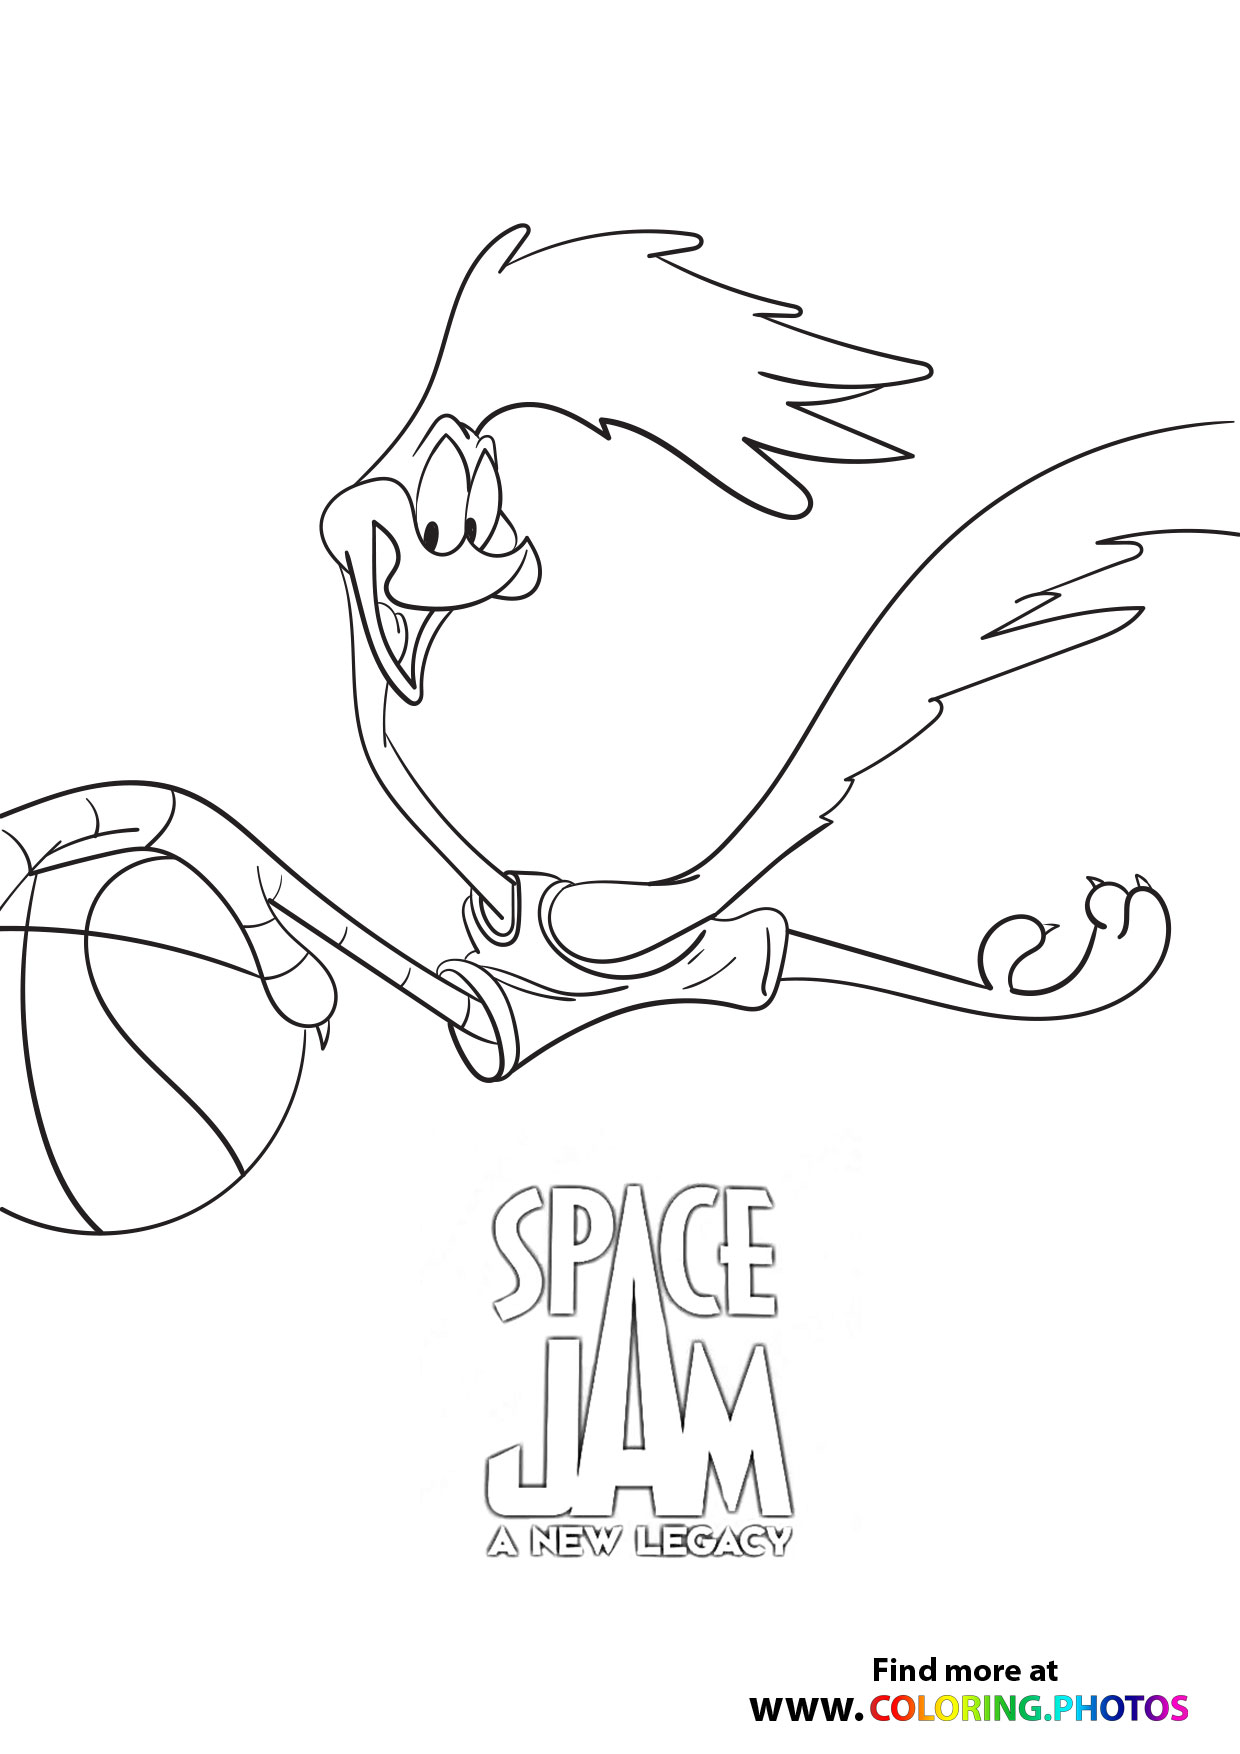 Road runner   Space Jam A new legacy   Coloring Pages for kids